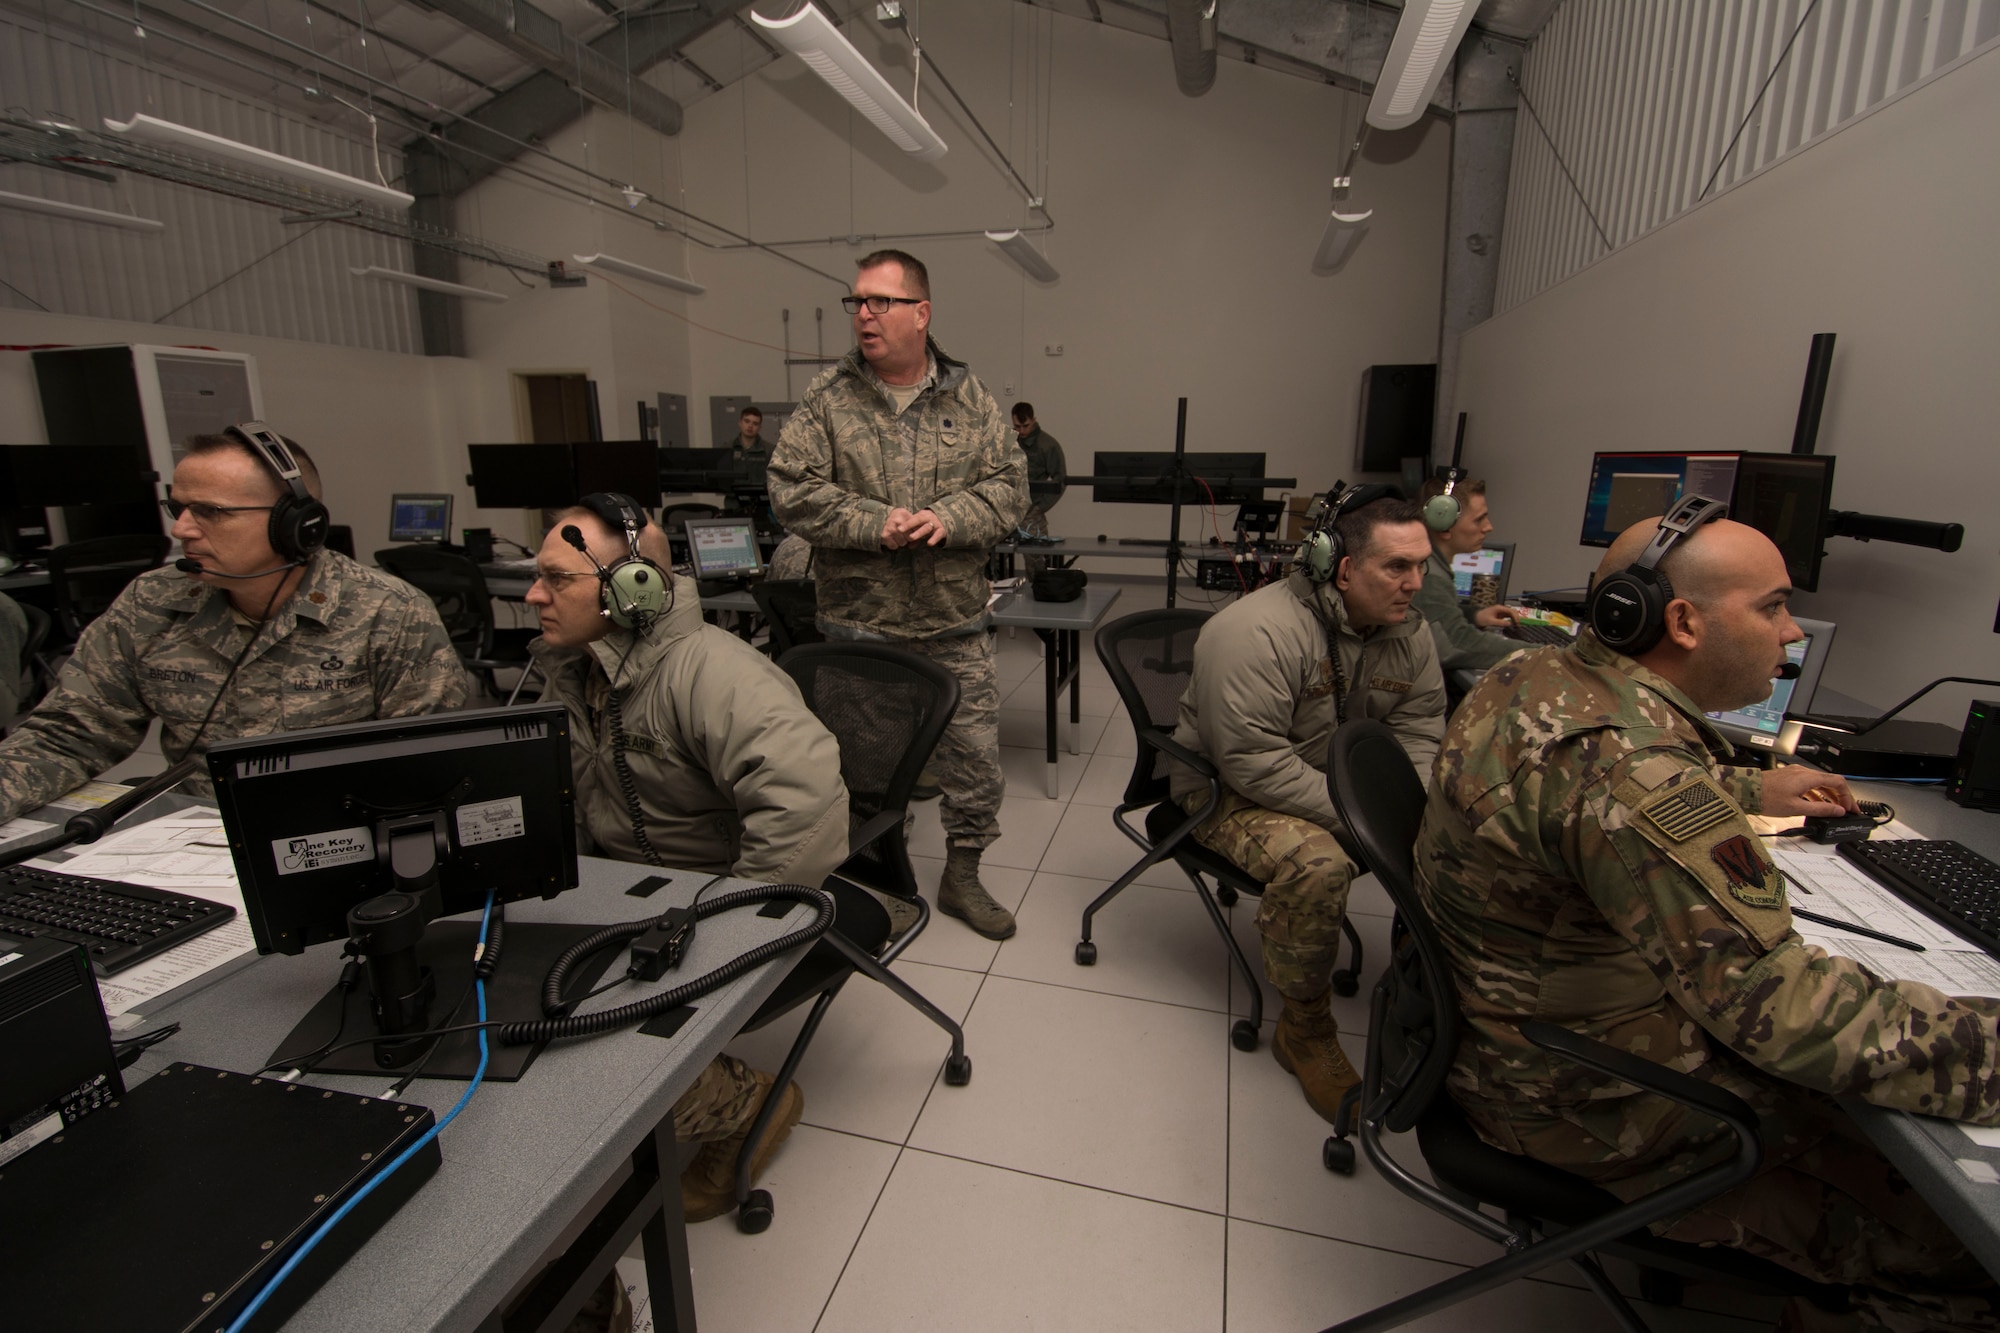 The 103rd Air Control Squadron participates in Sentry Savannah 19-1 Large Force Exercise in Orange, Conn., February 1, 2019. For the first time, 103rd ACS controlled aircraft operating in Savannah, Ga. from home station. (Air Force photo by Staff Sgt. Chad Warren)